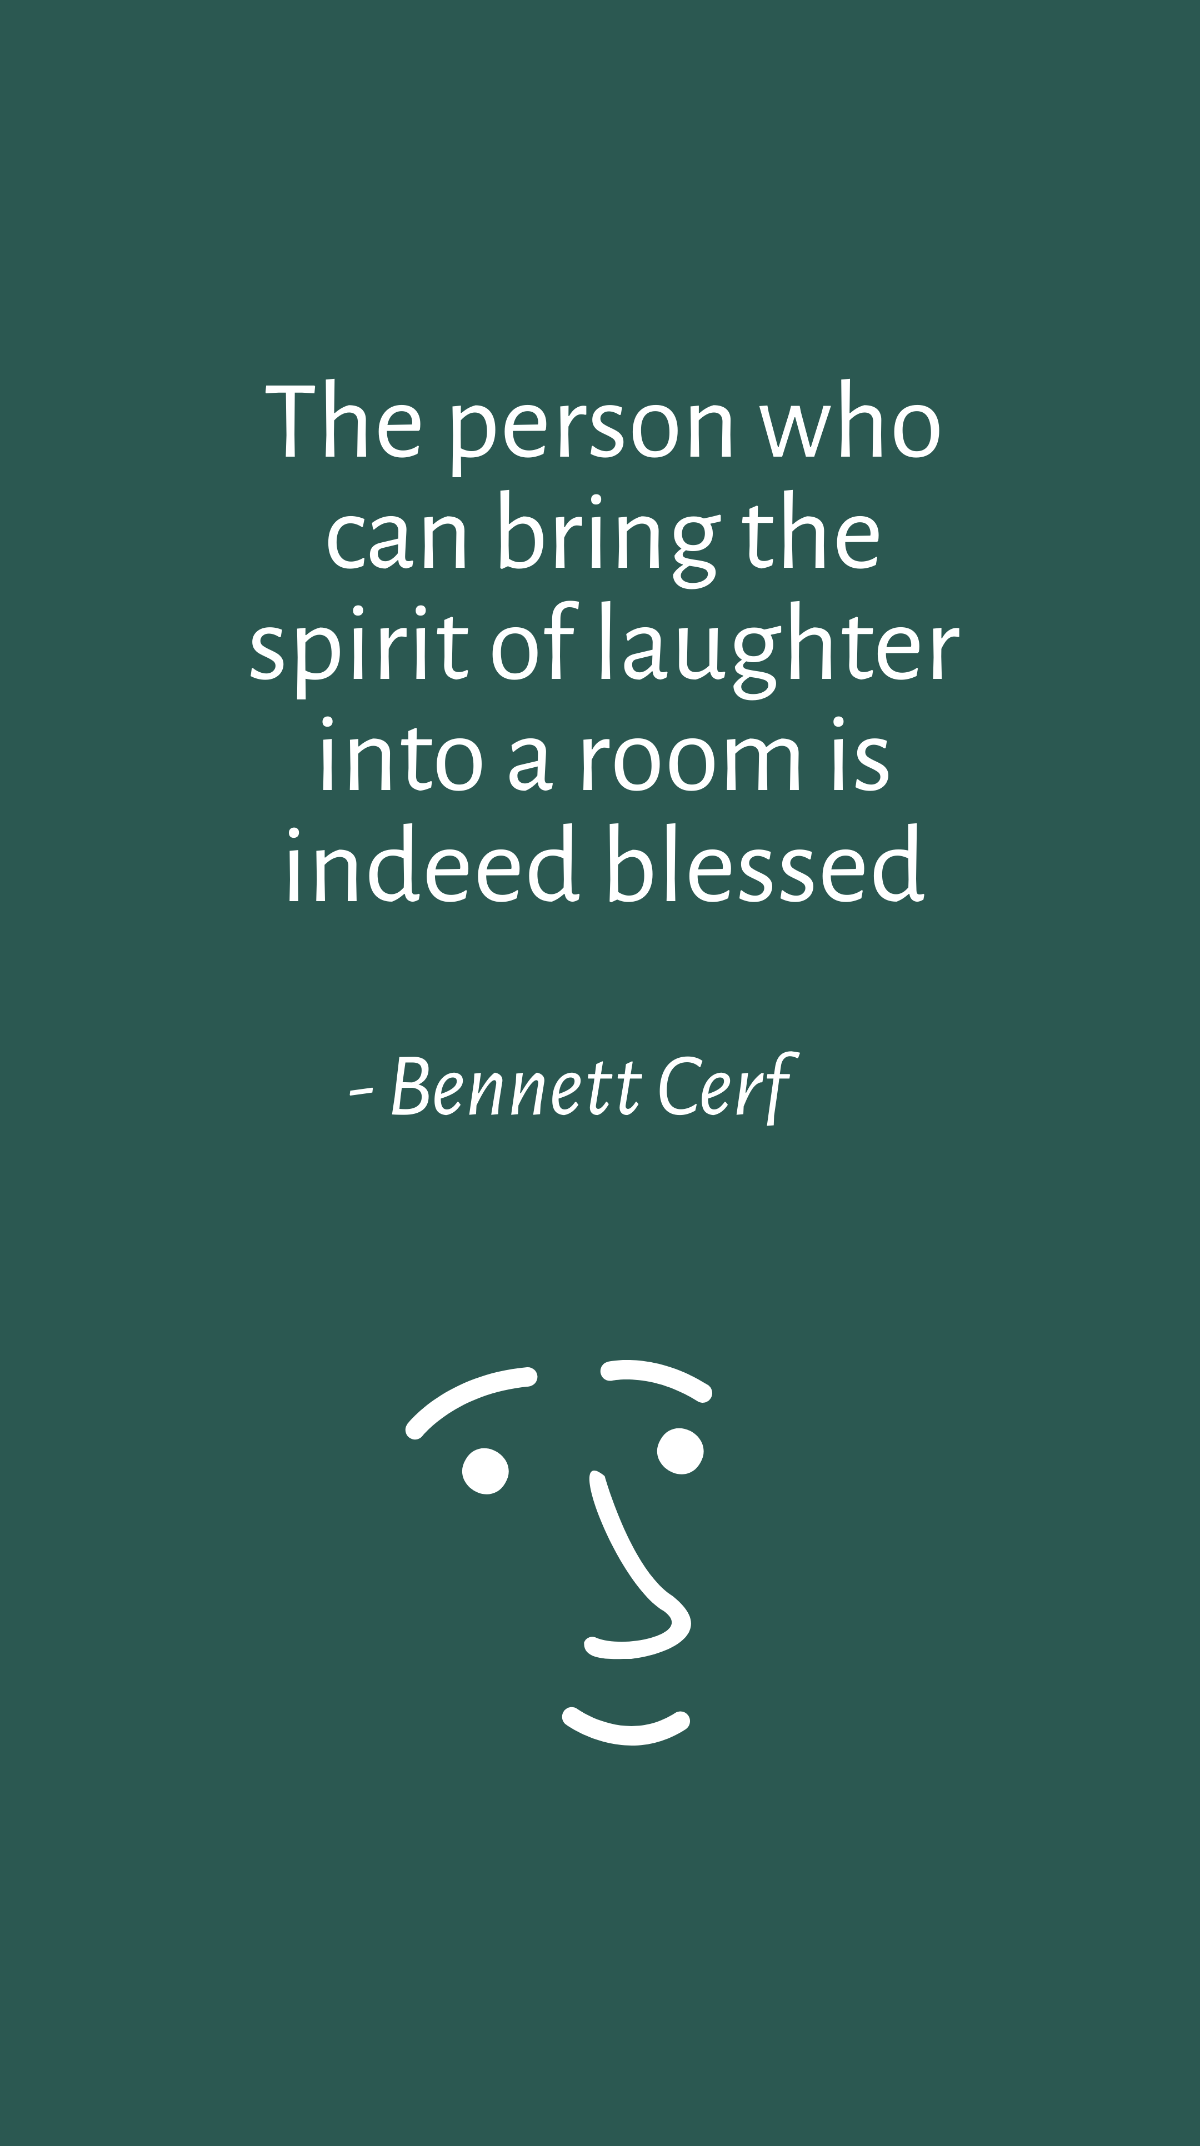 Bennett Cerf - The person who can bring the spirit of laughter into a room is indeed blessed Template